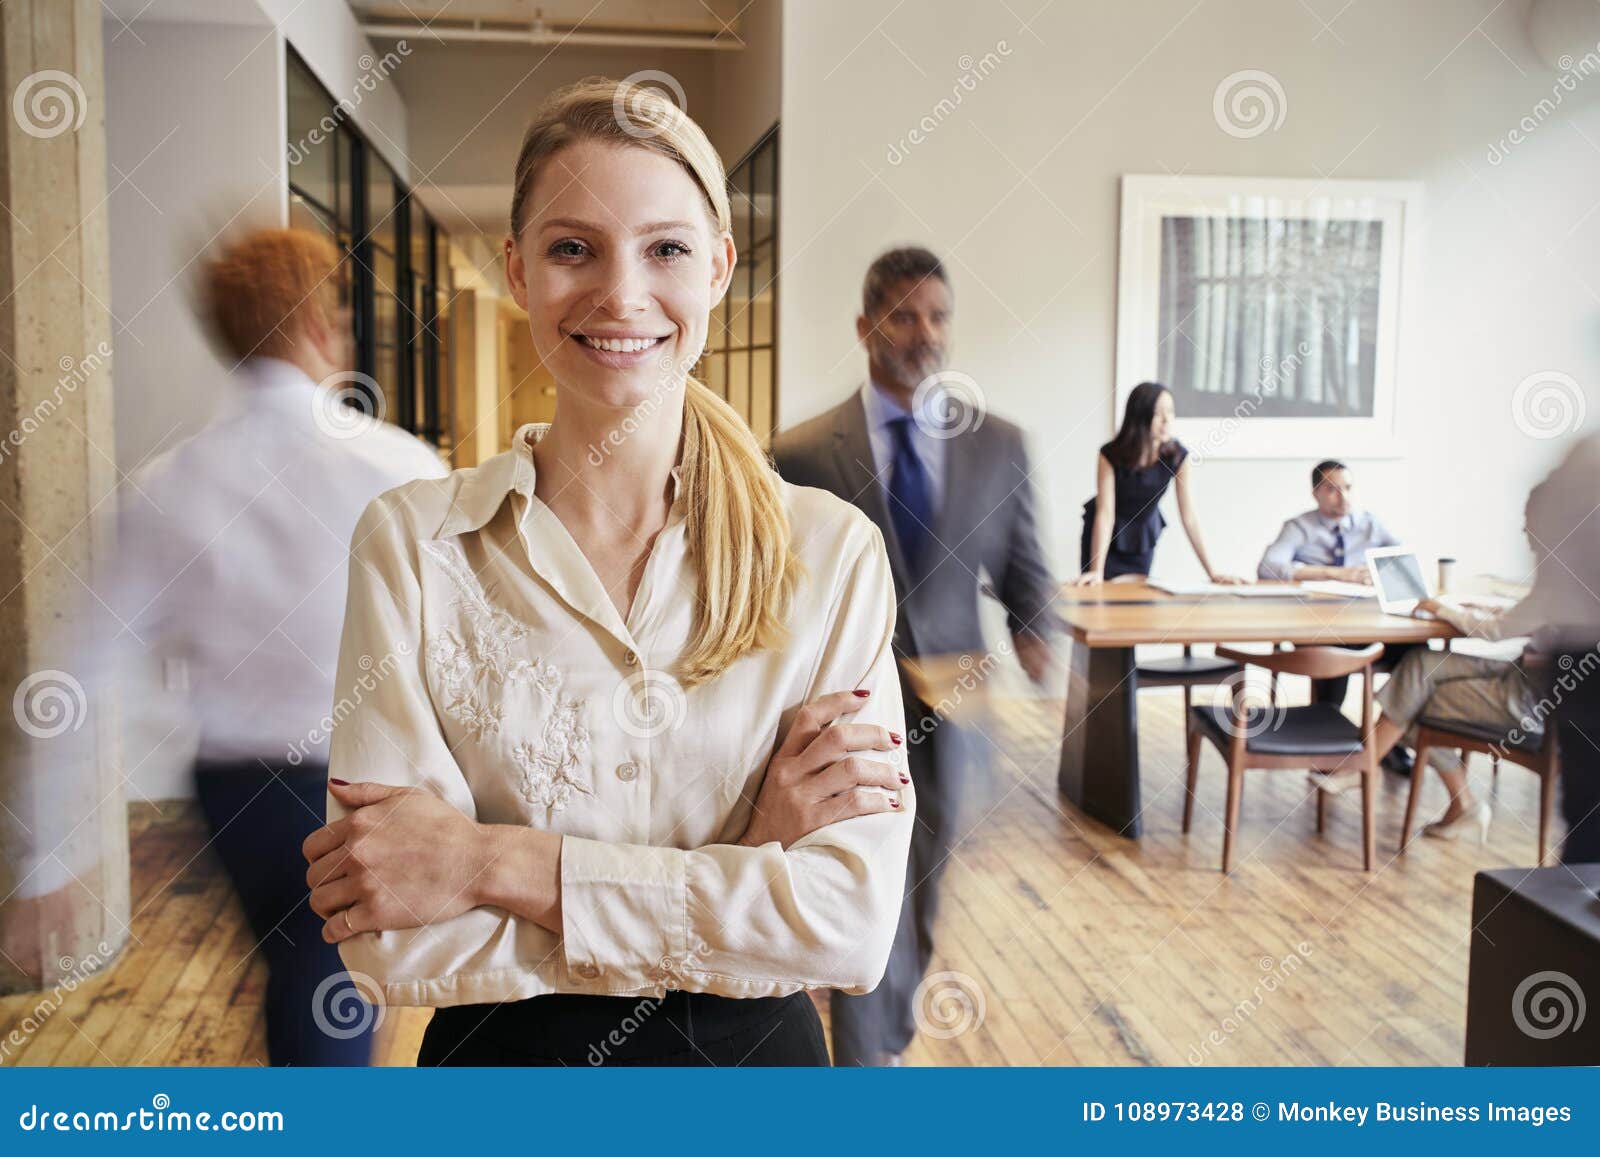 portrait of young blonde woman in a busy modern workplace